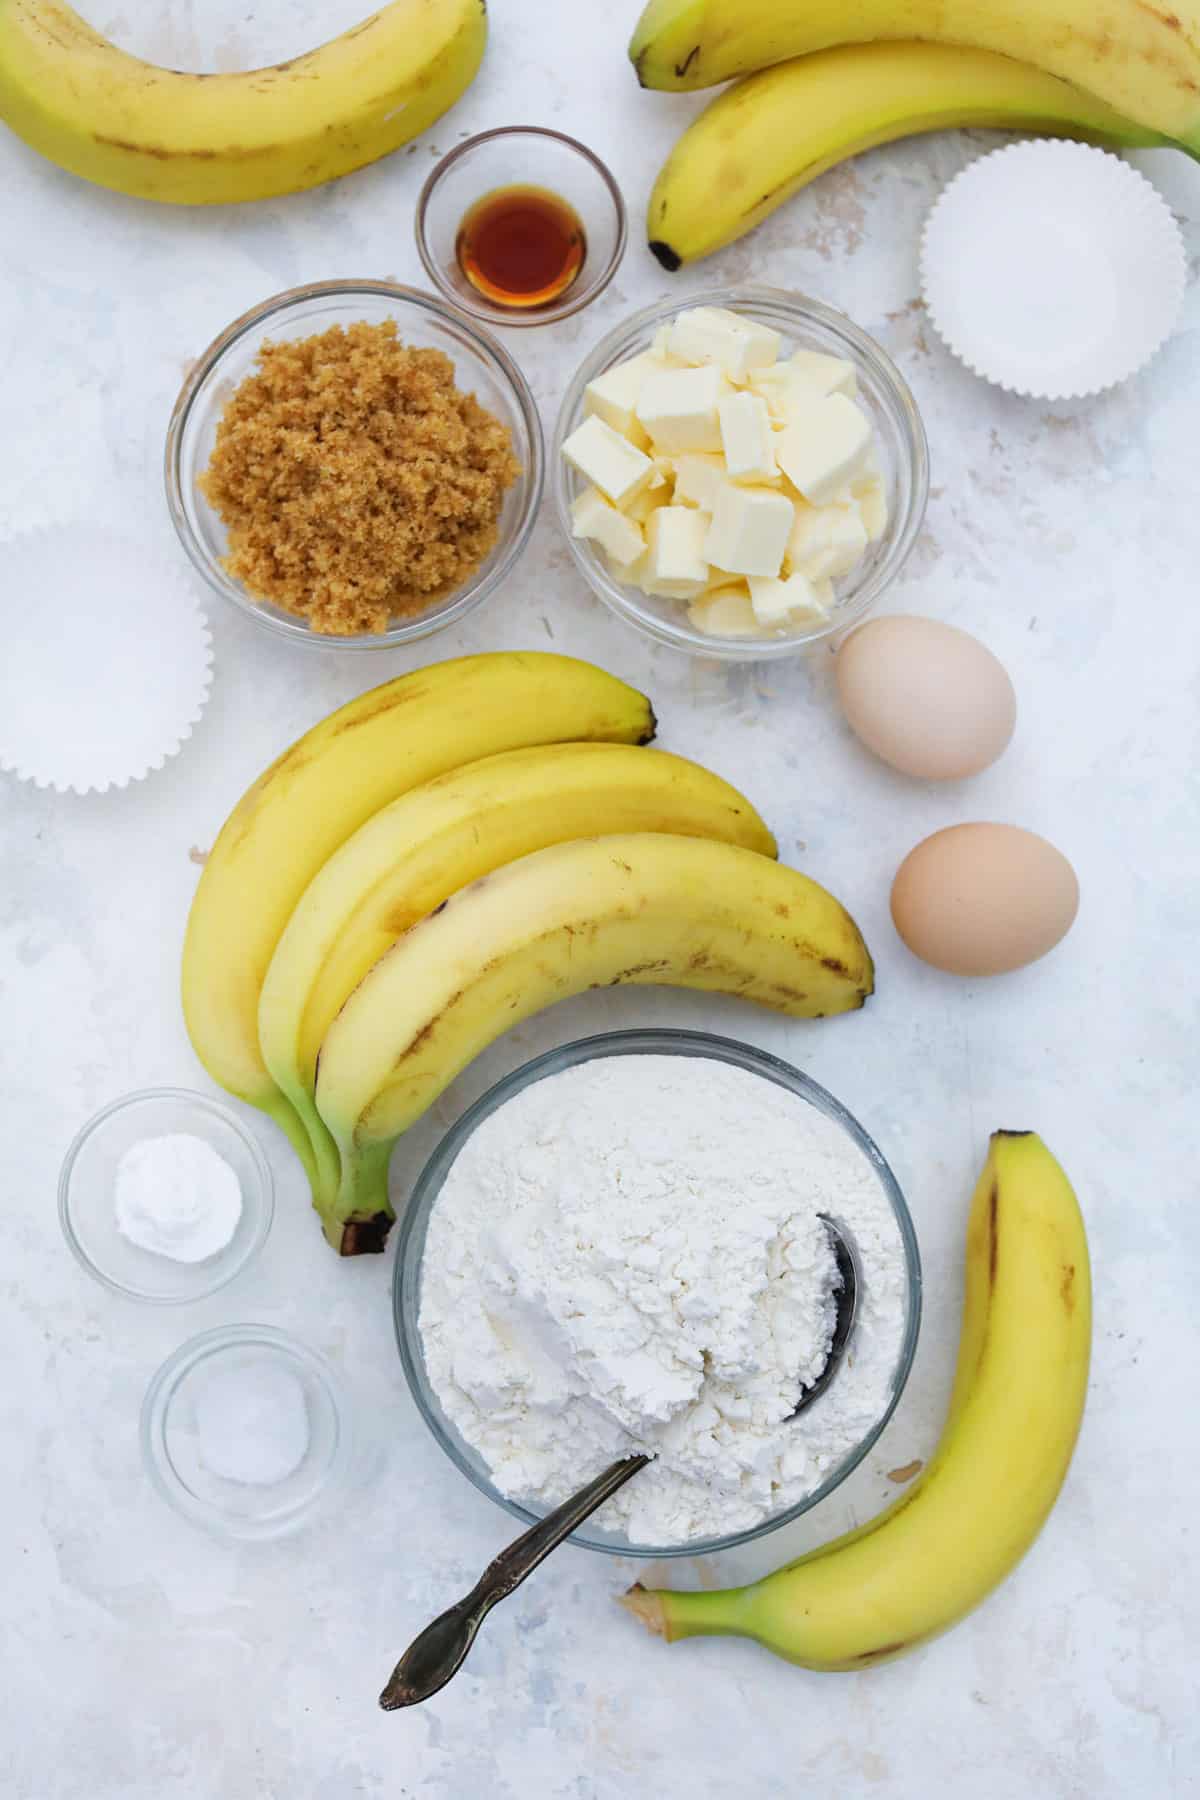 Ingredients for banana crumb muffins. 